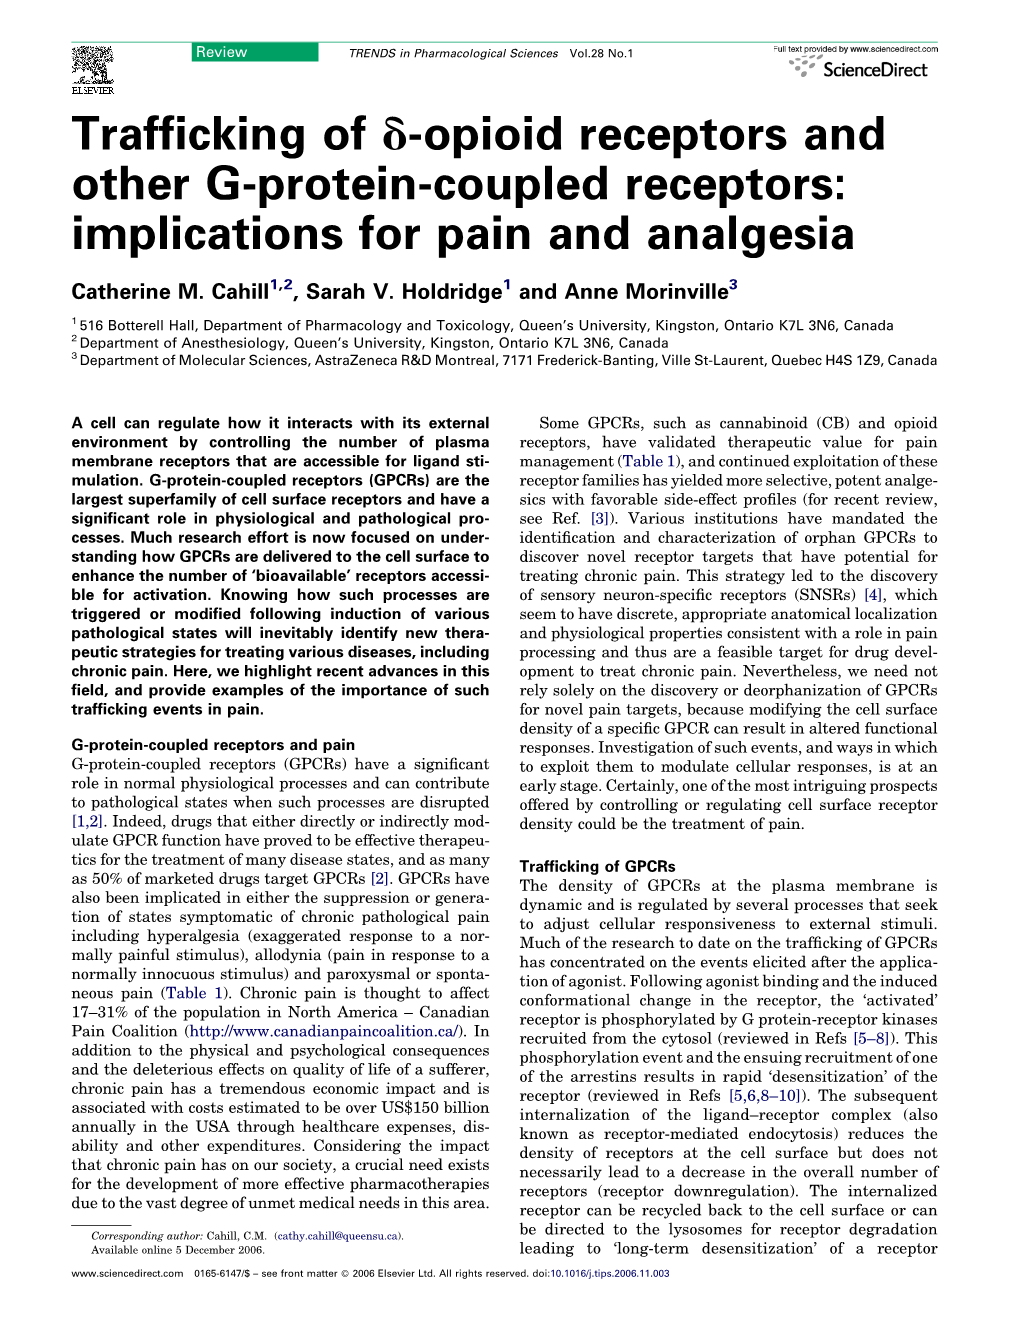 Trafficking of D-Opioid Receptors and Other G-Protein